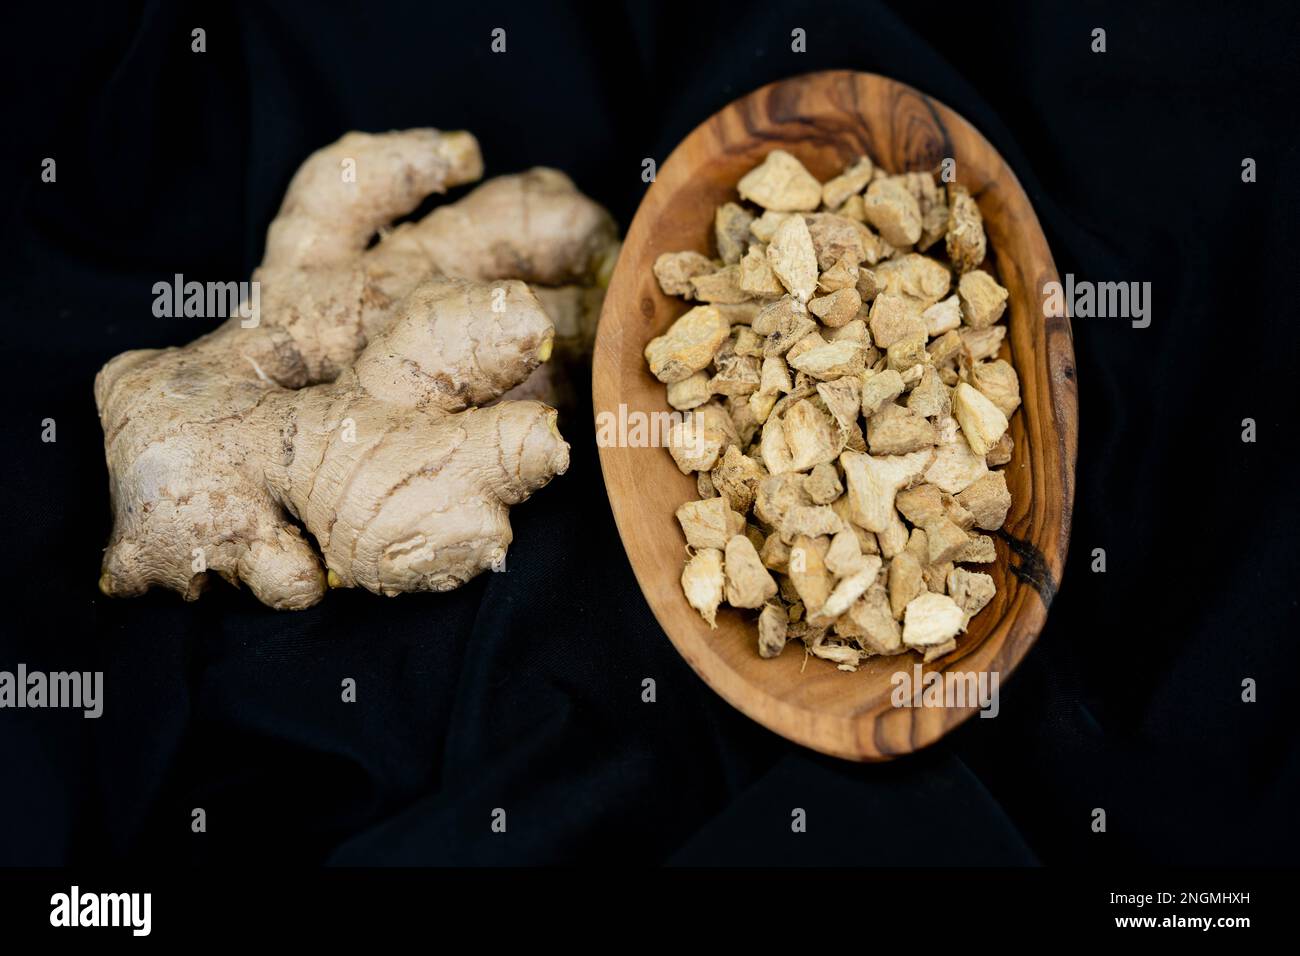 fresh ginger and dried ginger powder on olive wood Stock Photo